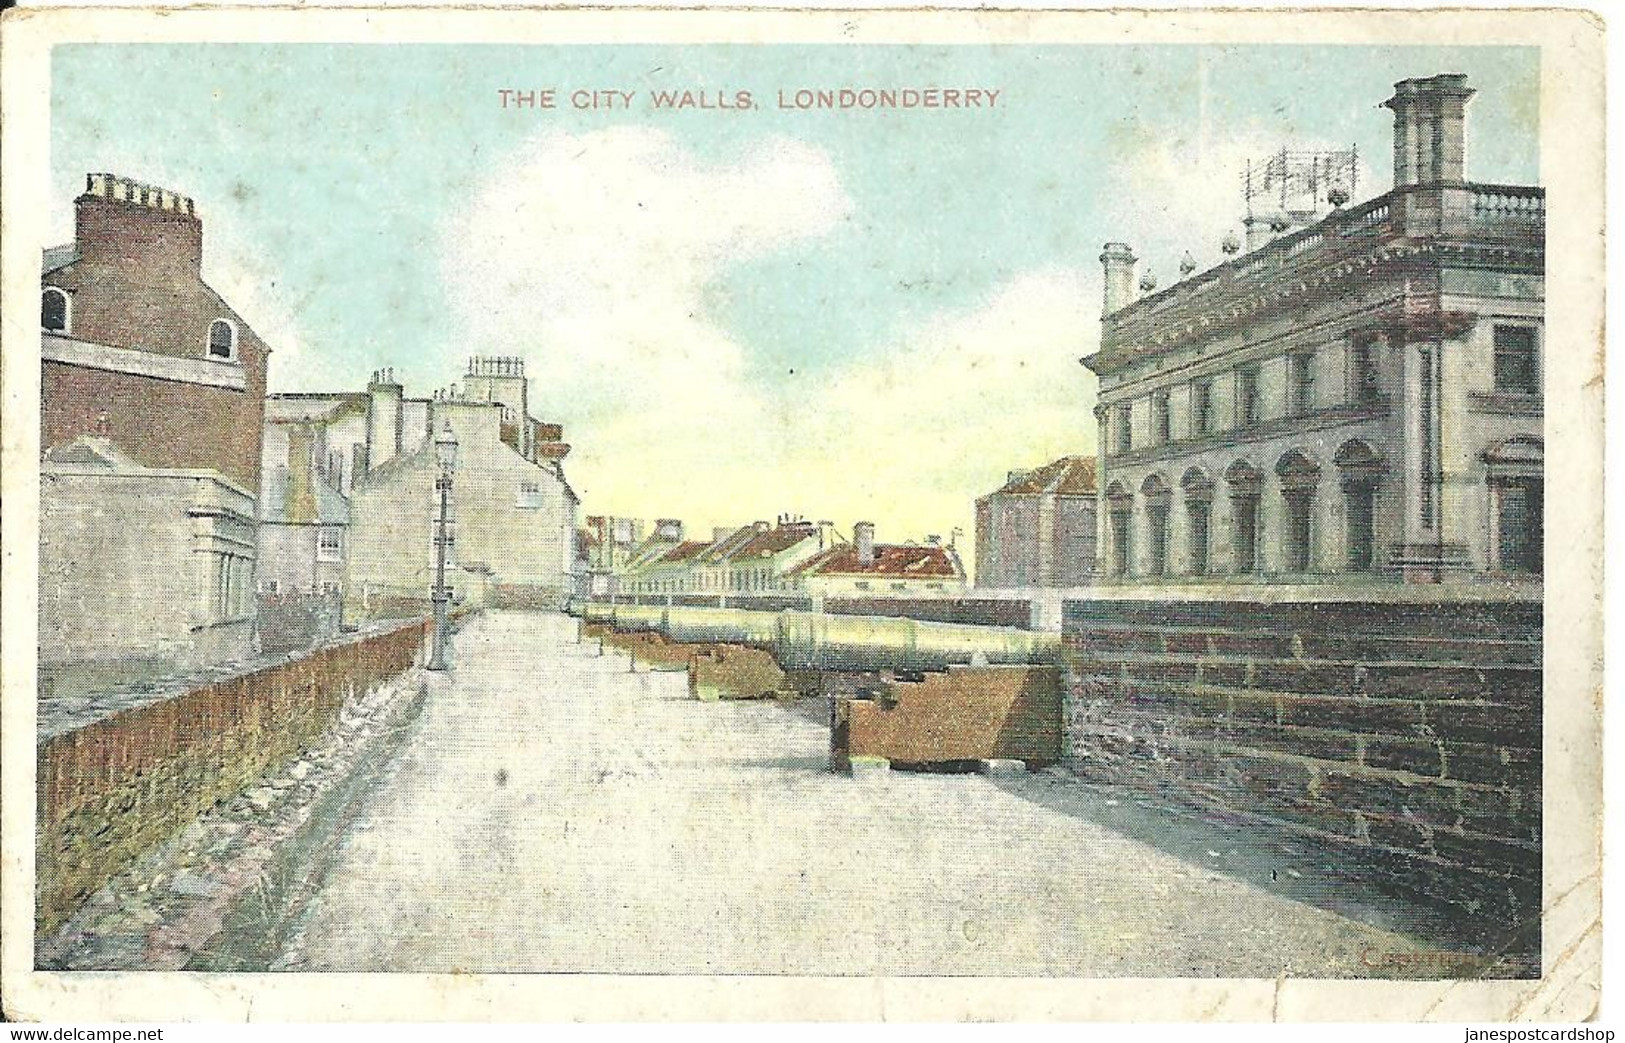 THE CITY WALLS LONDONDERRY - CANNONS - GOOD HIGHCLERE HAMPSHIRE POSTMARK - 1914 - Londonderry